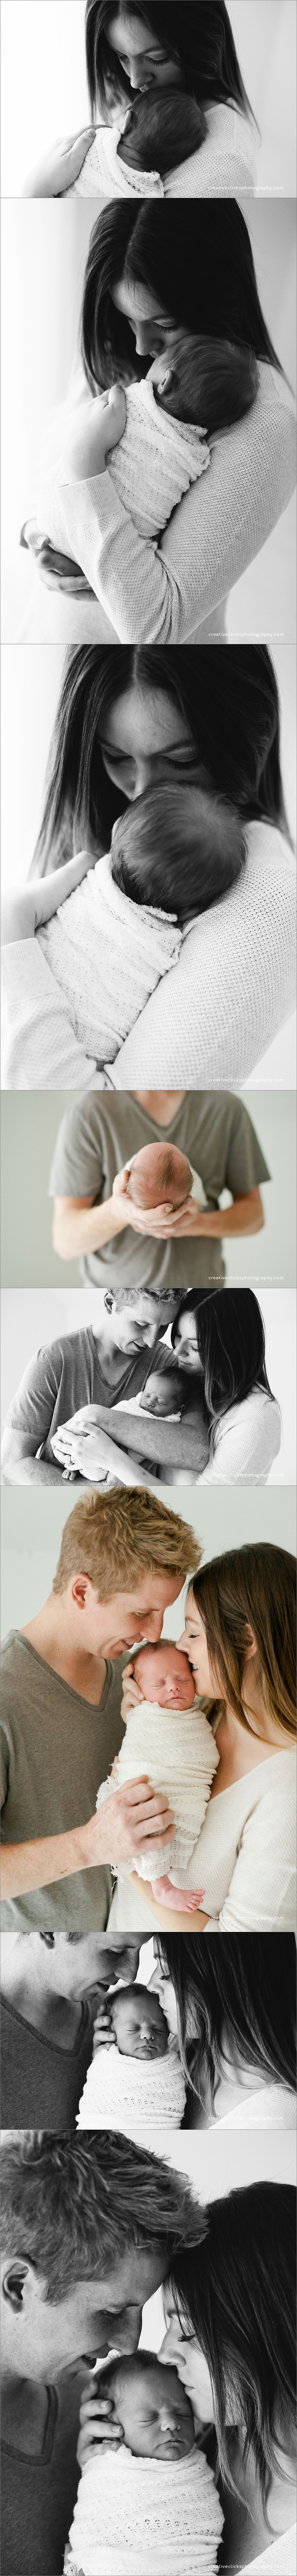 newborn baby lovingly held in parents arms